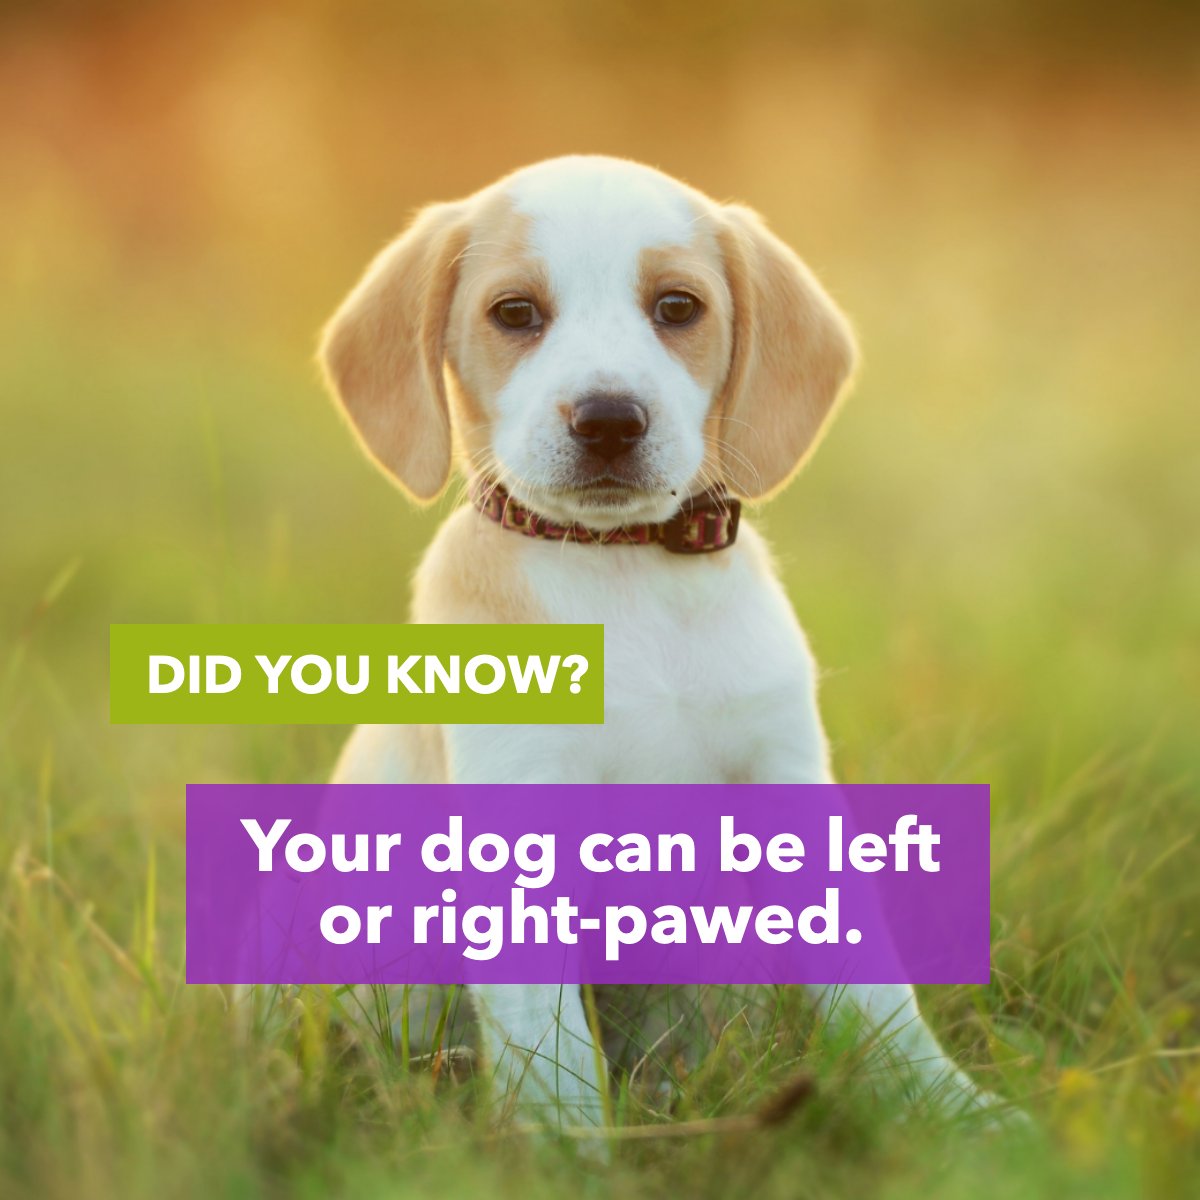 How do we know if our dog is right-pawed or left-pawed?  🐶

#funfacts #dogfact #dogfacts #dogfactsoflife
 #chadwickknight #realtor #realestate #floridarealtor #floridarealestate #mvprealty #realestateadvisor #homesforsale #property #forsale #newhome #househunting